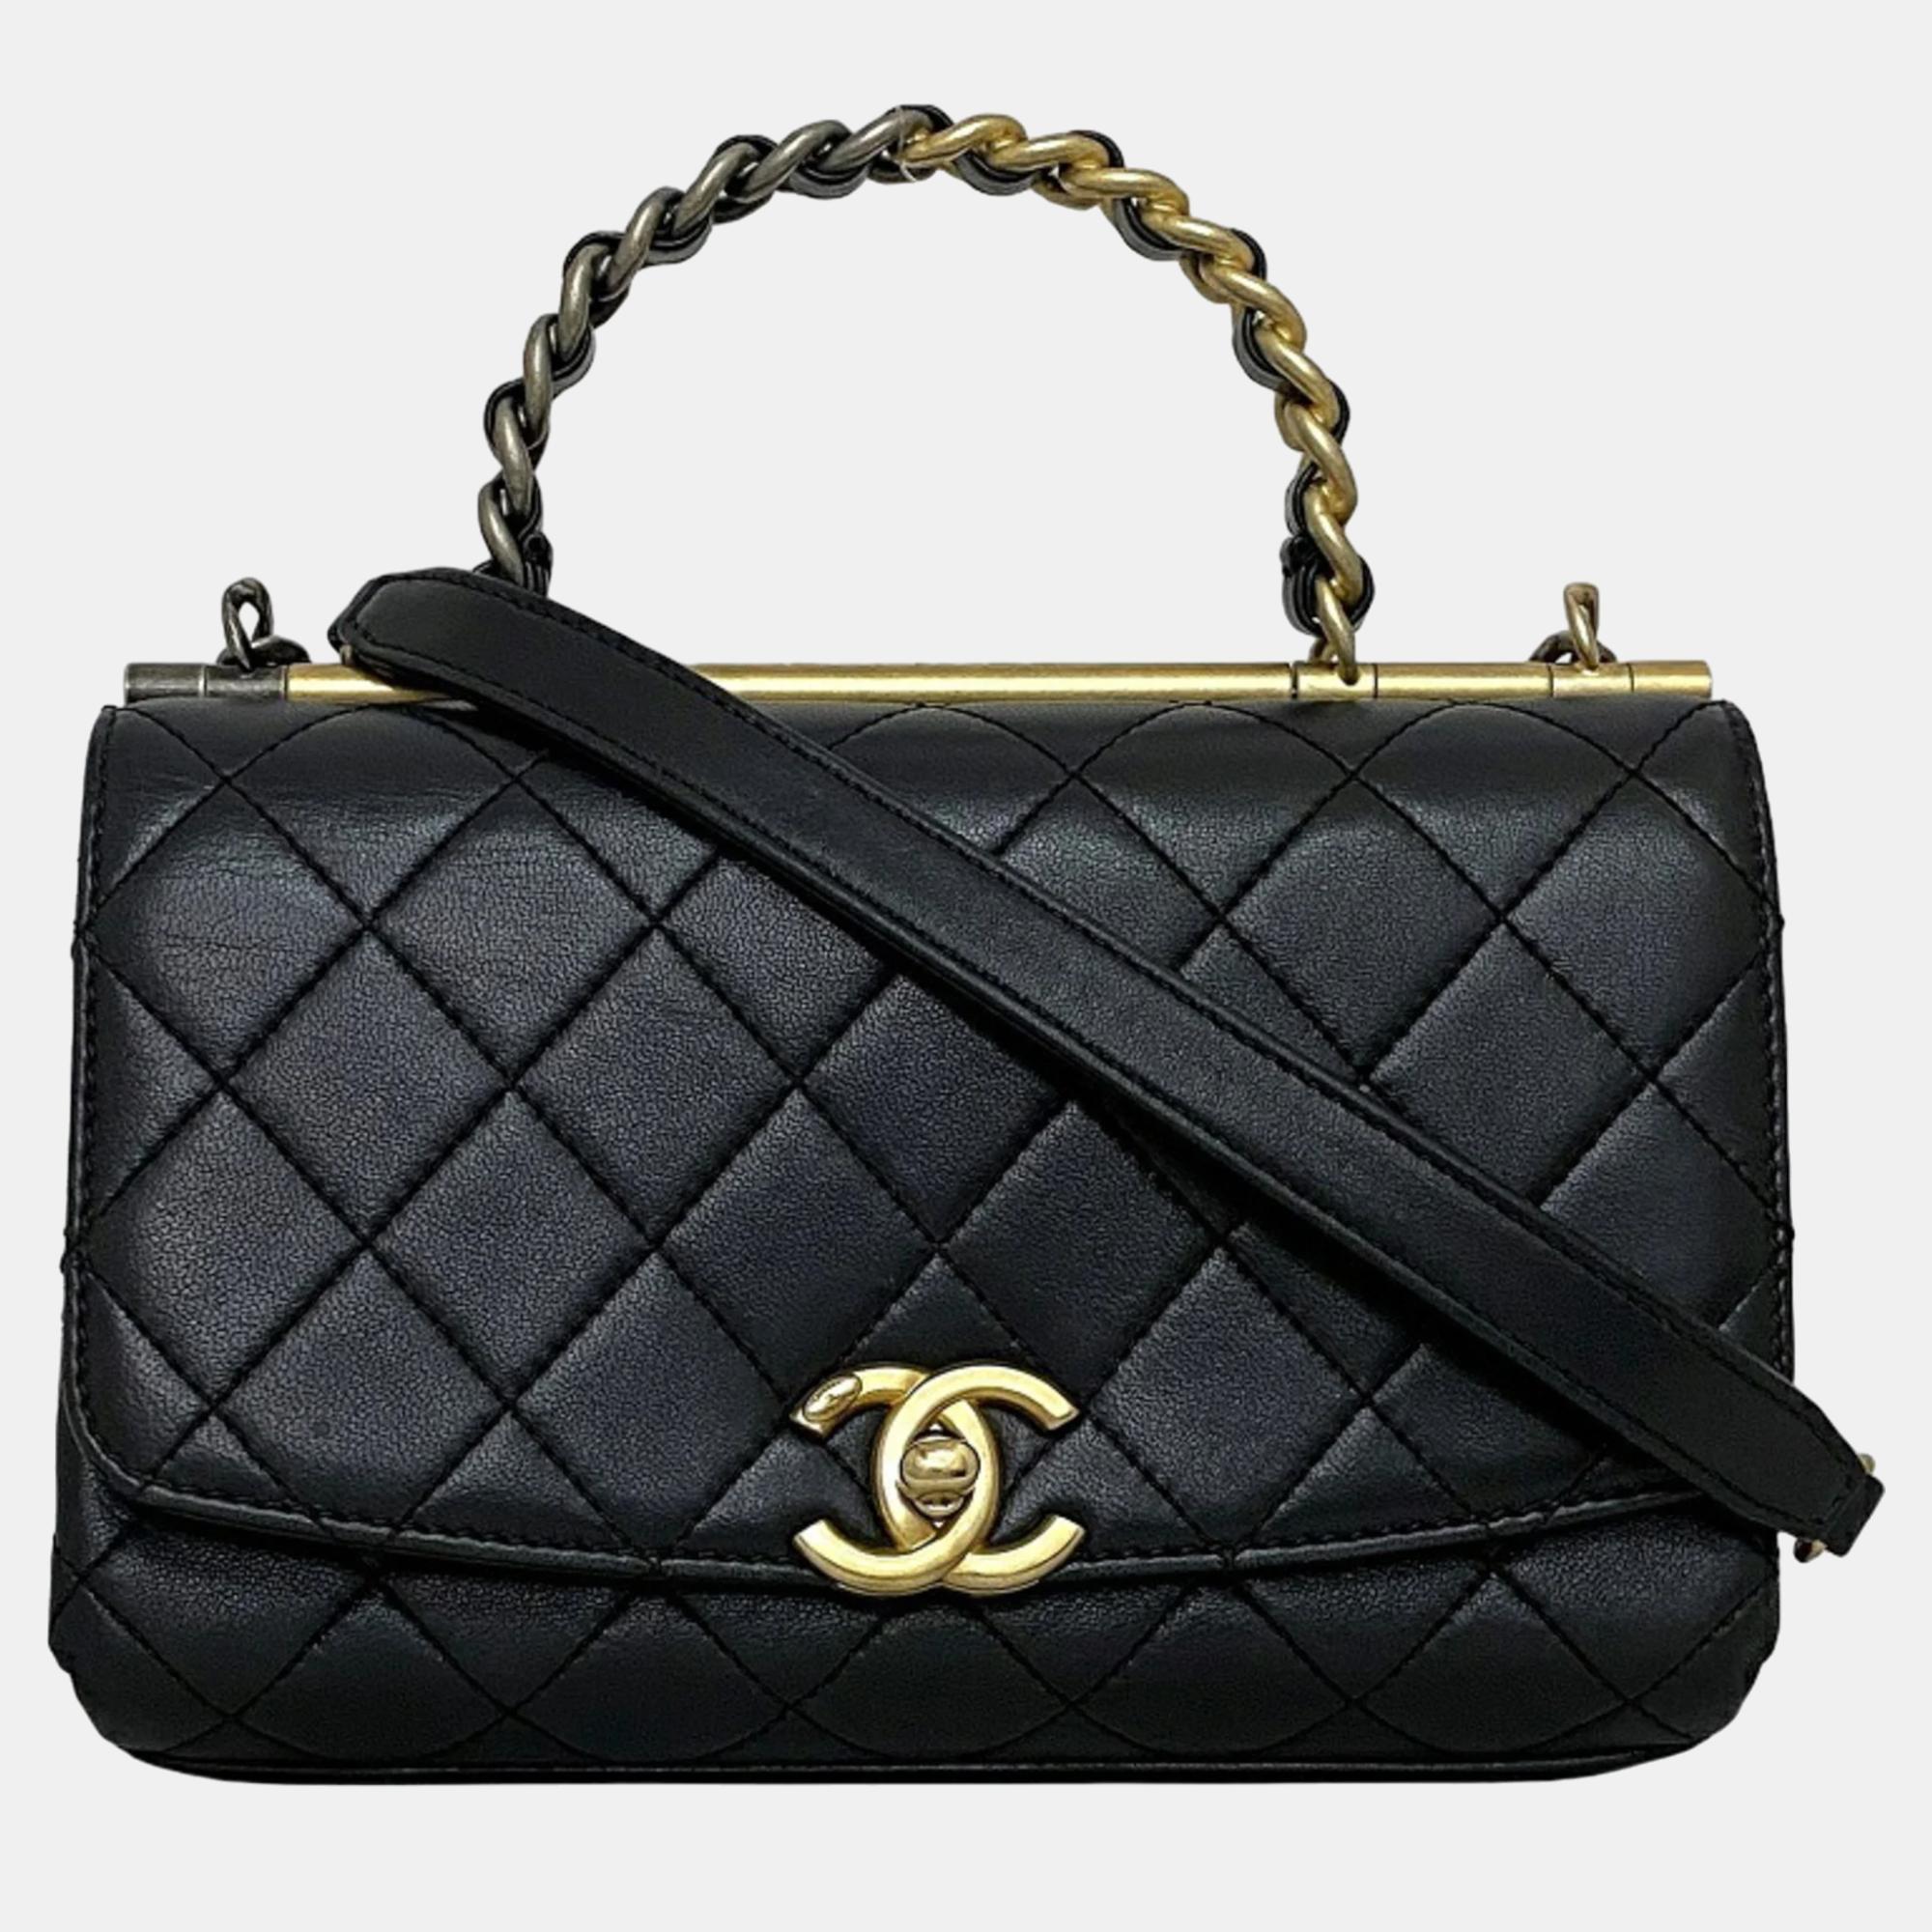 Pre-owned Chanel Black Quilted Lambskin Leather Small Classic Top Handle Flap Bag